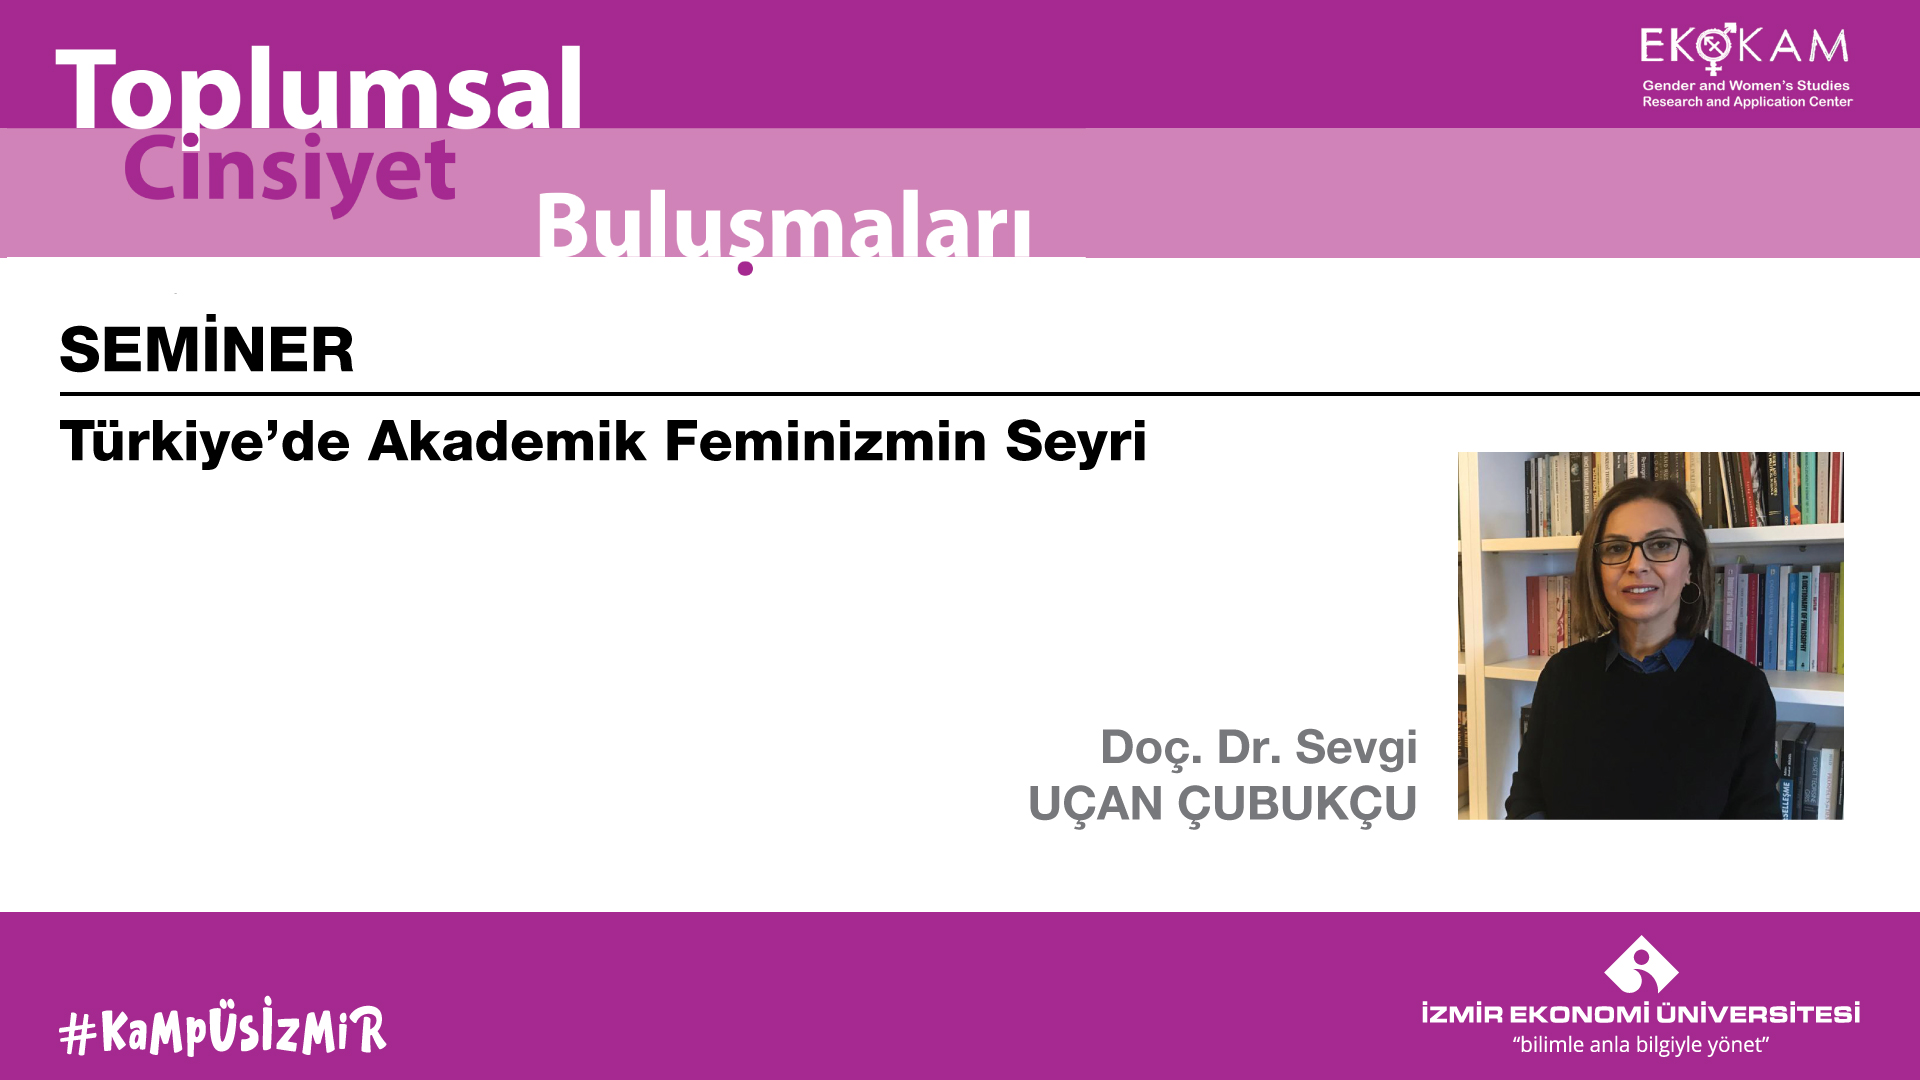 The course of academic feminism in Turkey